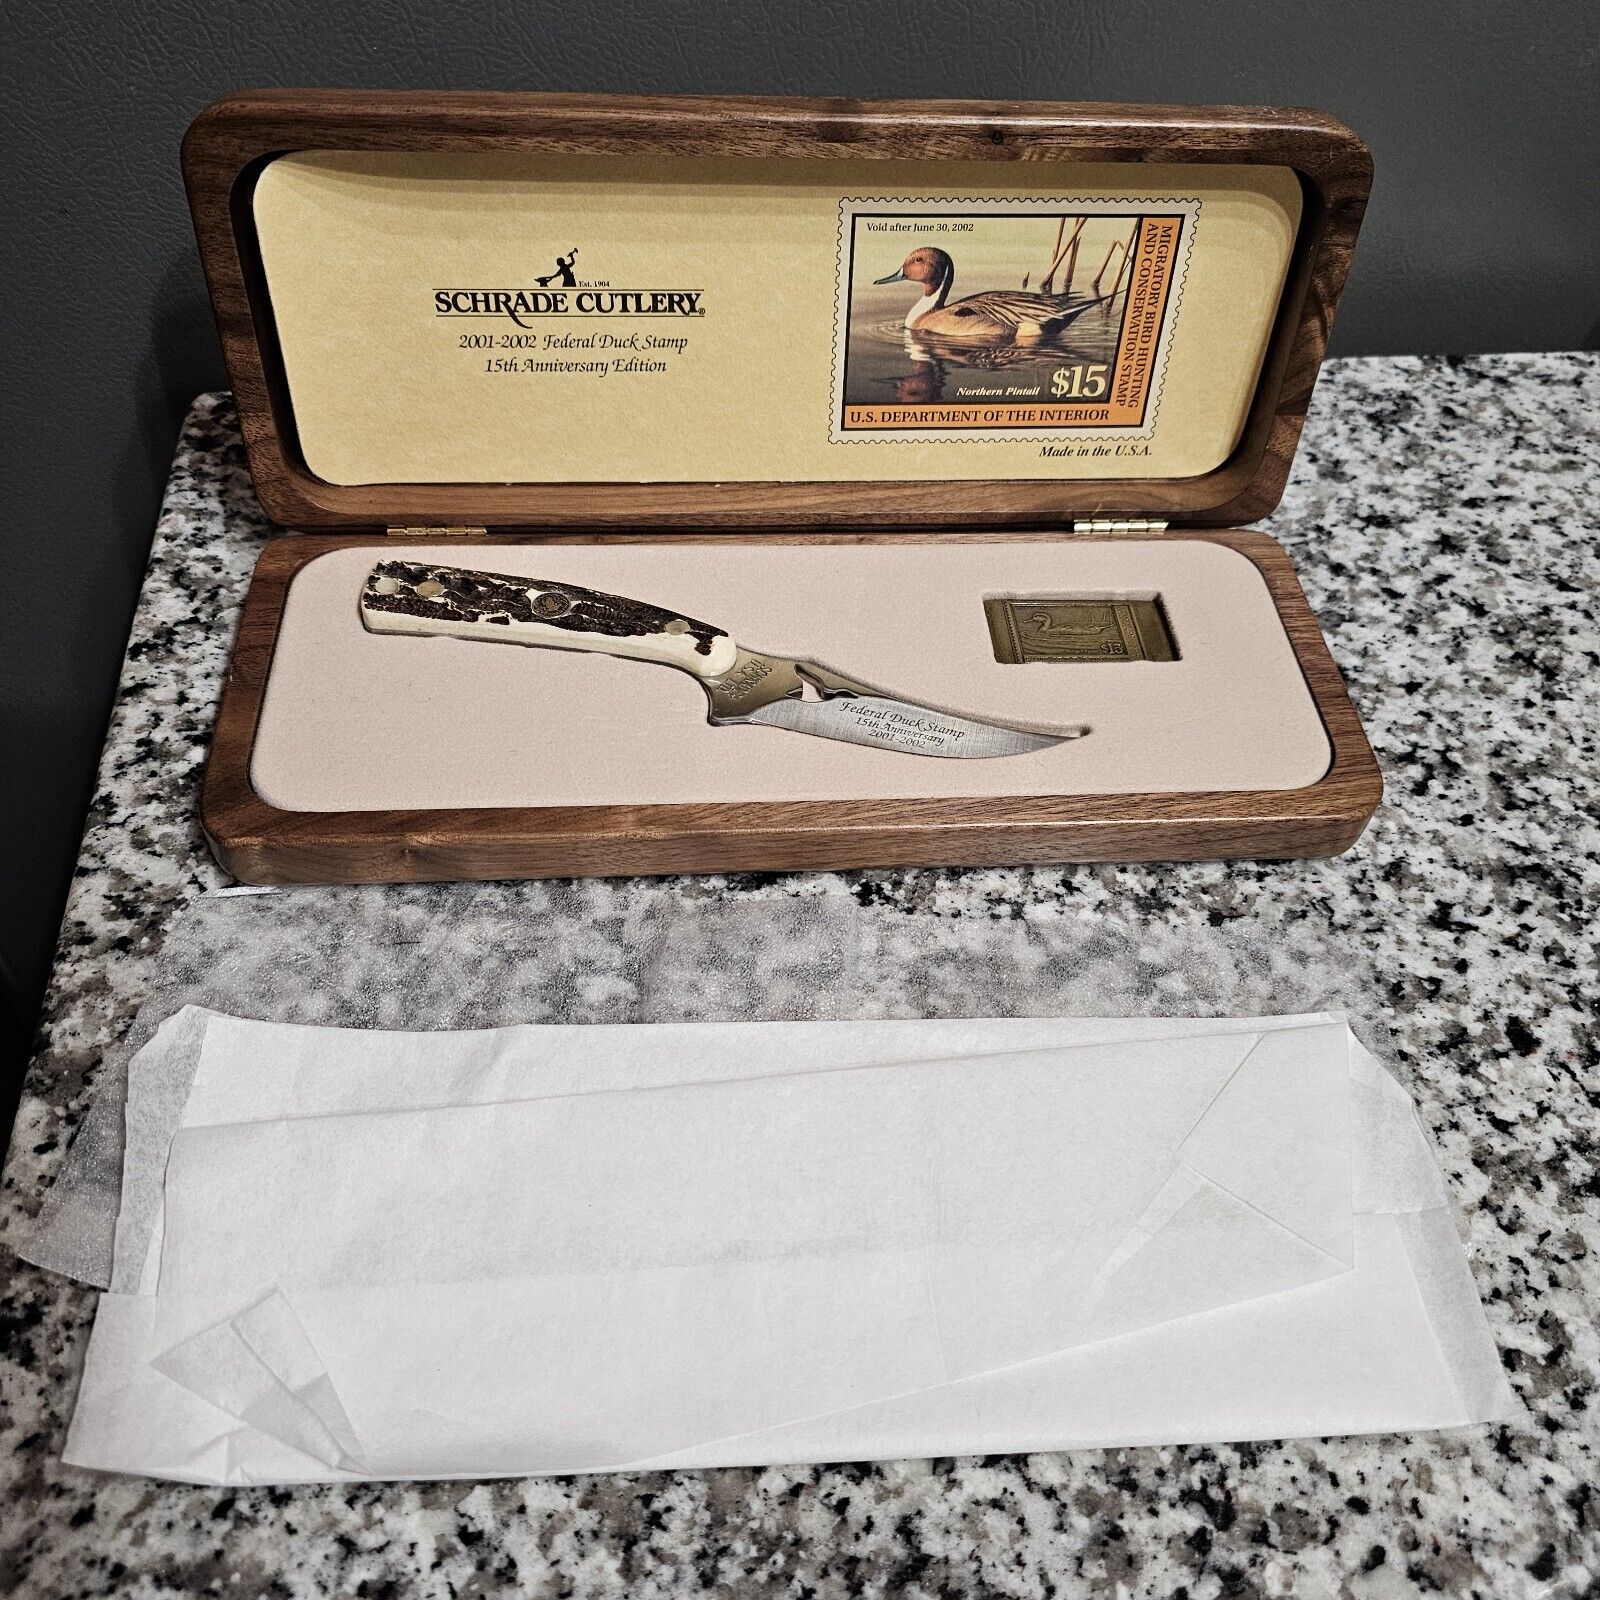 NEW USA Schrade Cutlery 2001-2002 Federal Duck Stamp 15th Anniversary Edition